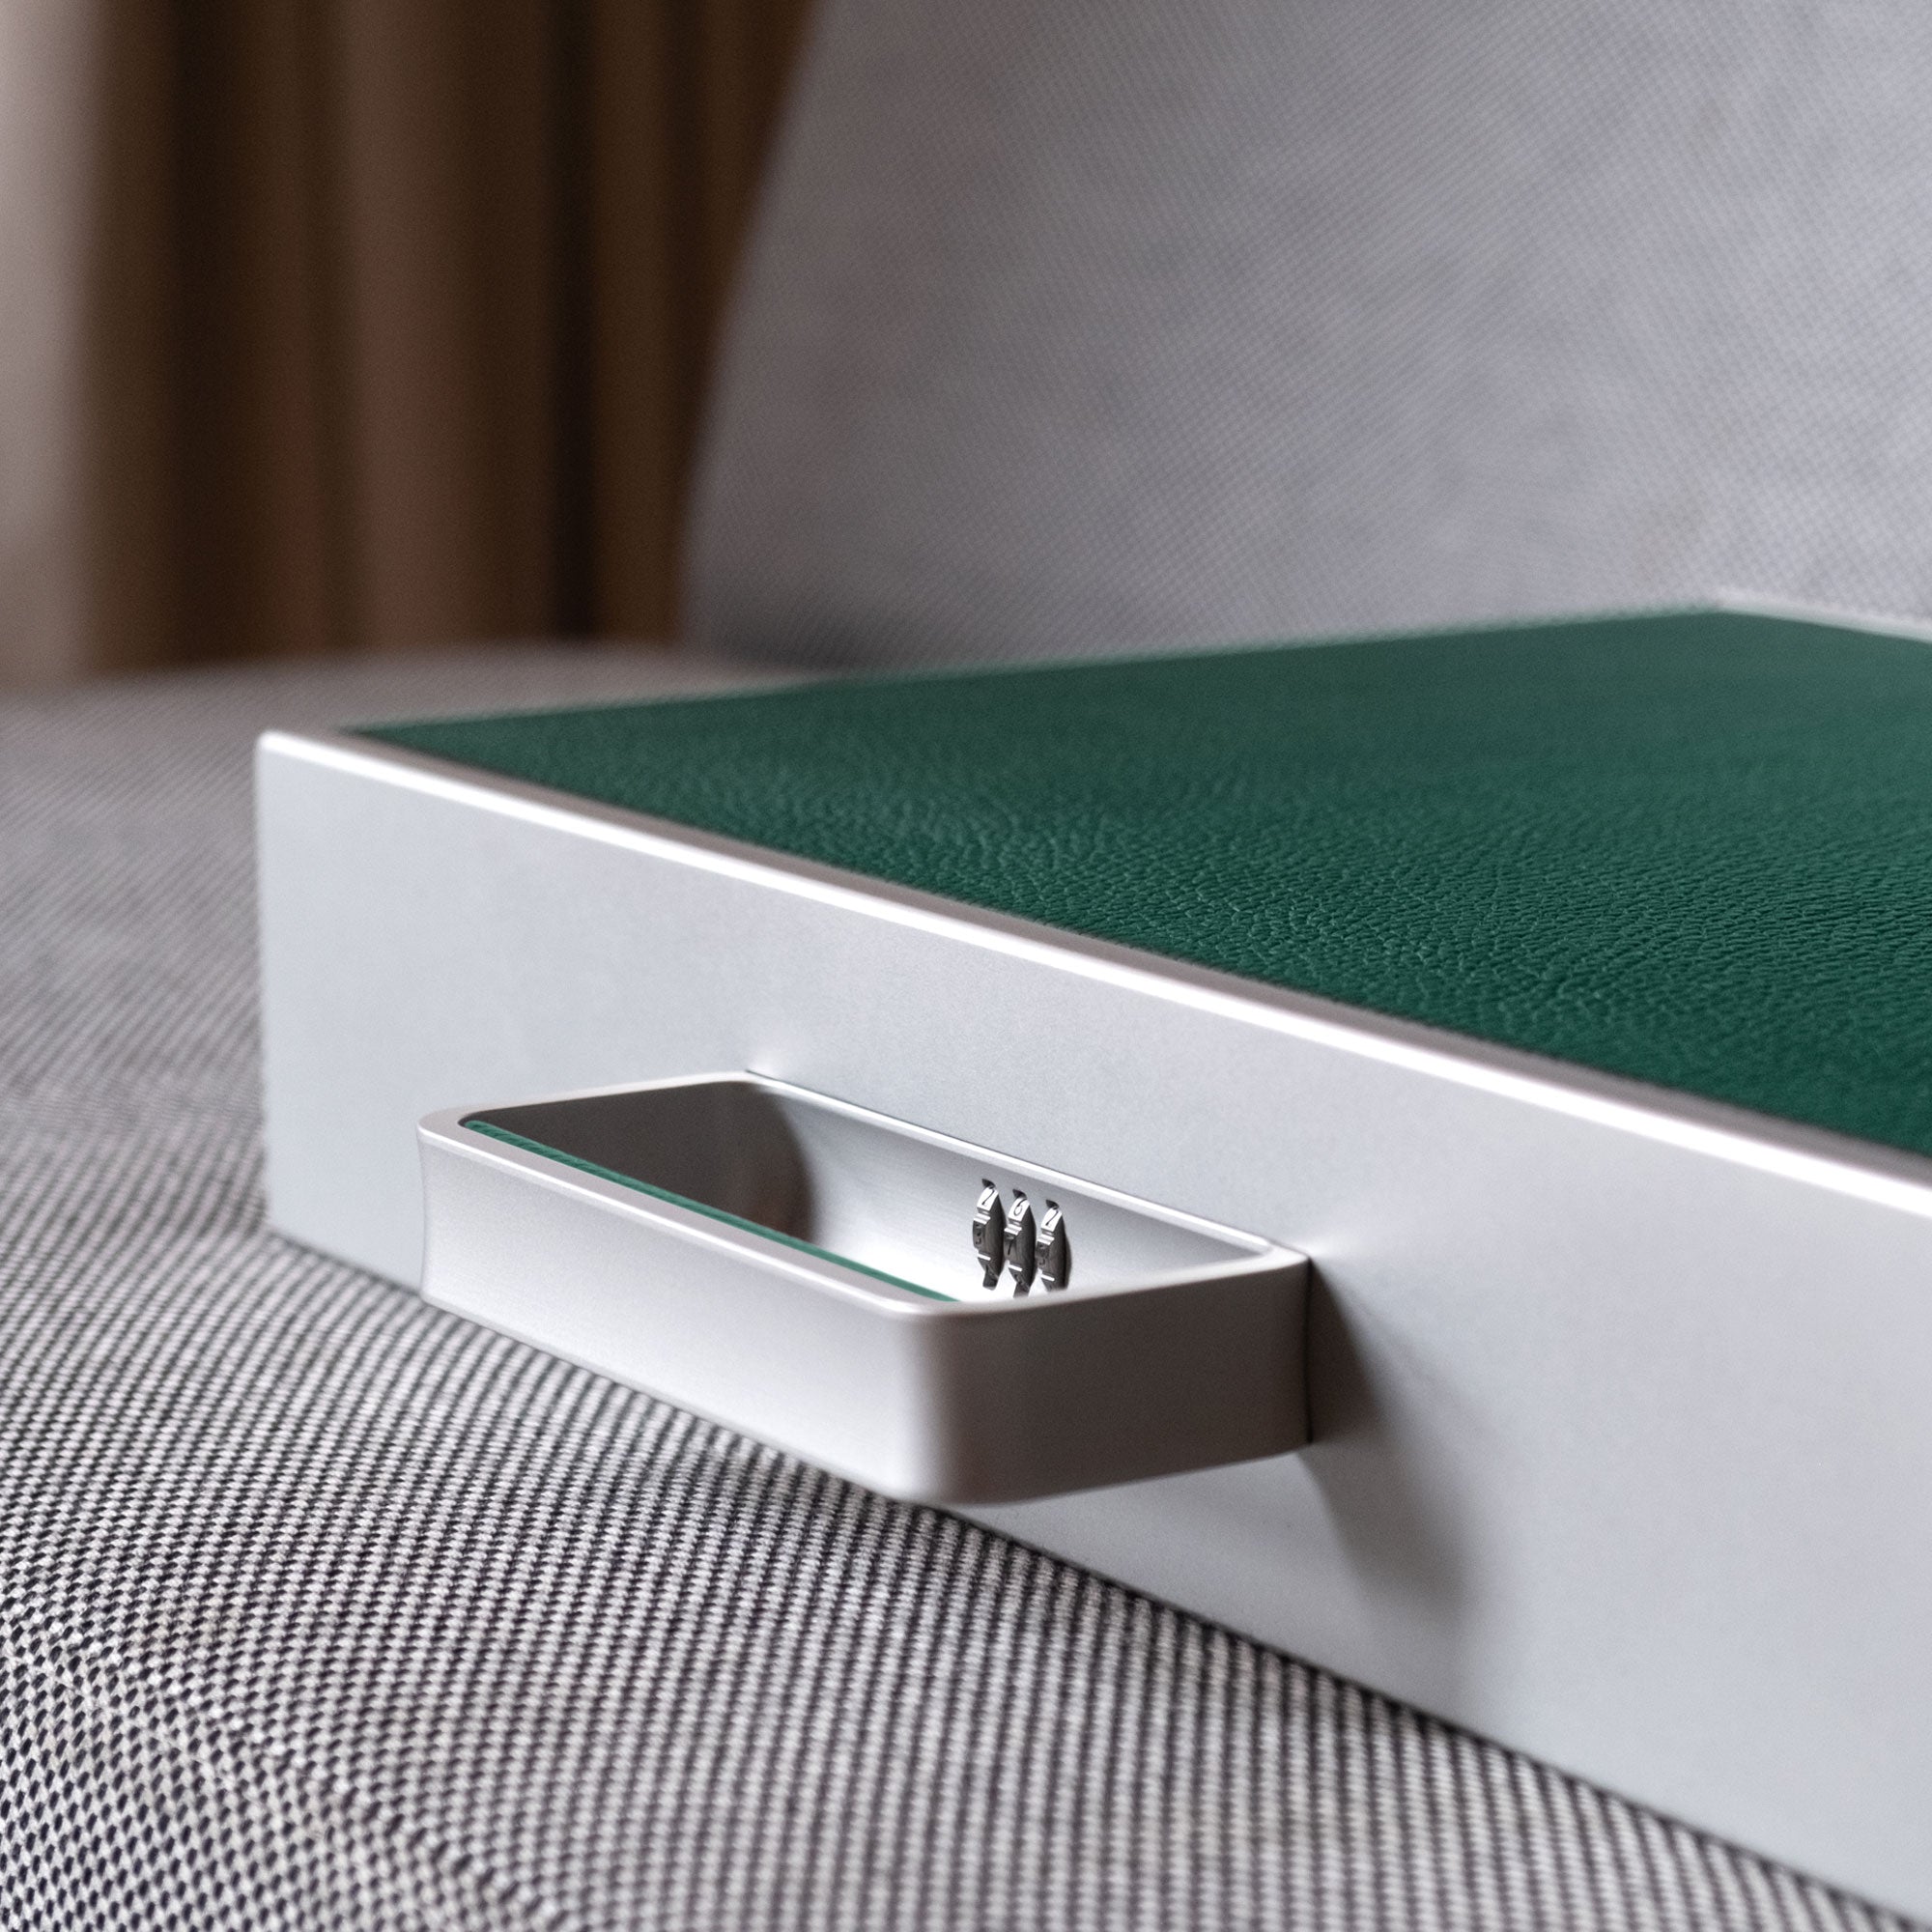 Detail shot of emerald Mackenzie watch briefcase anodized aluminum handle with lock with protective code